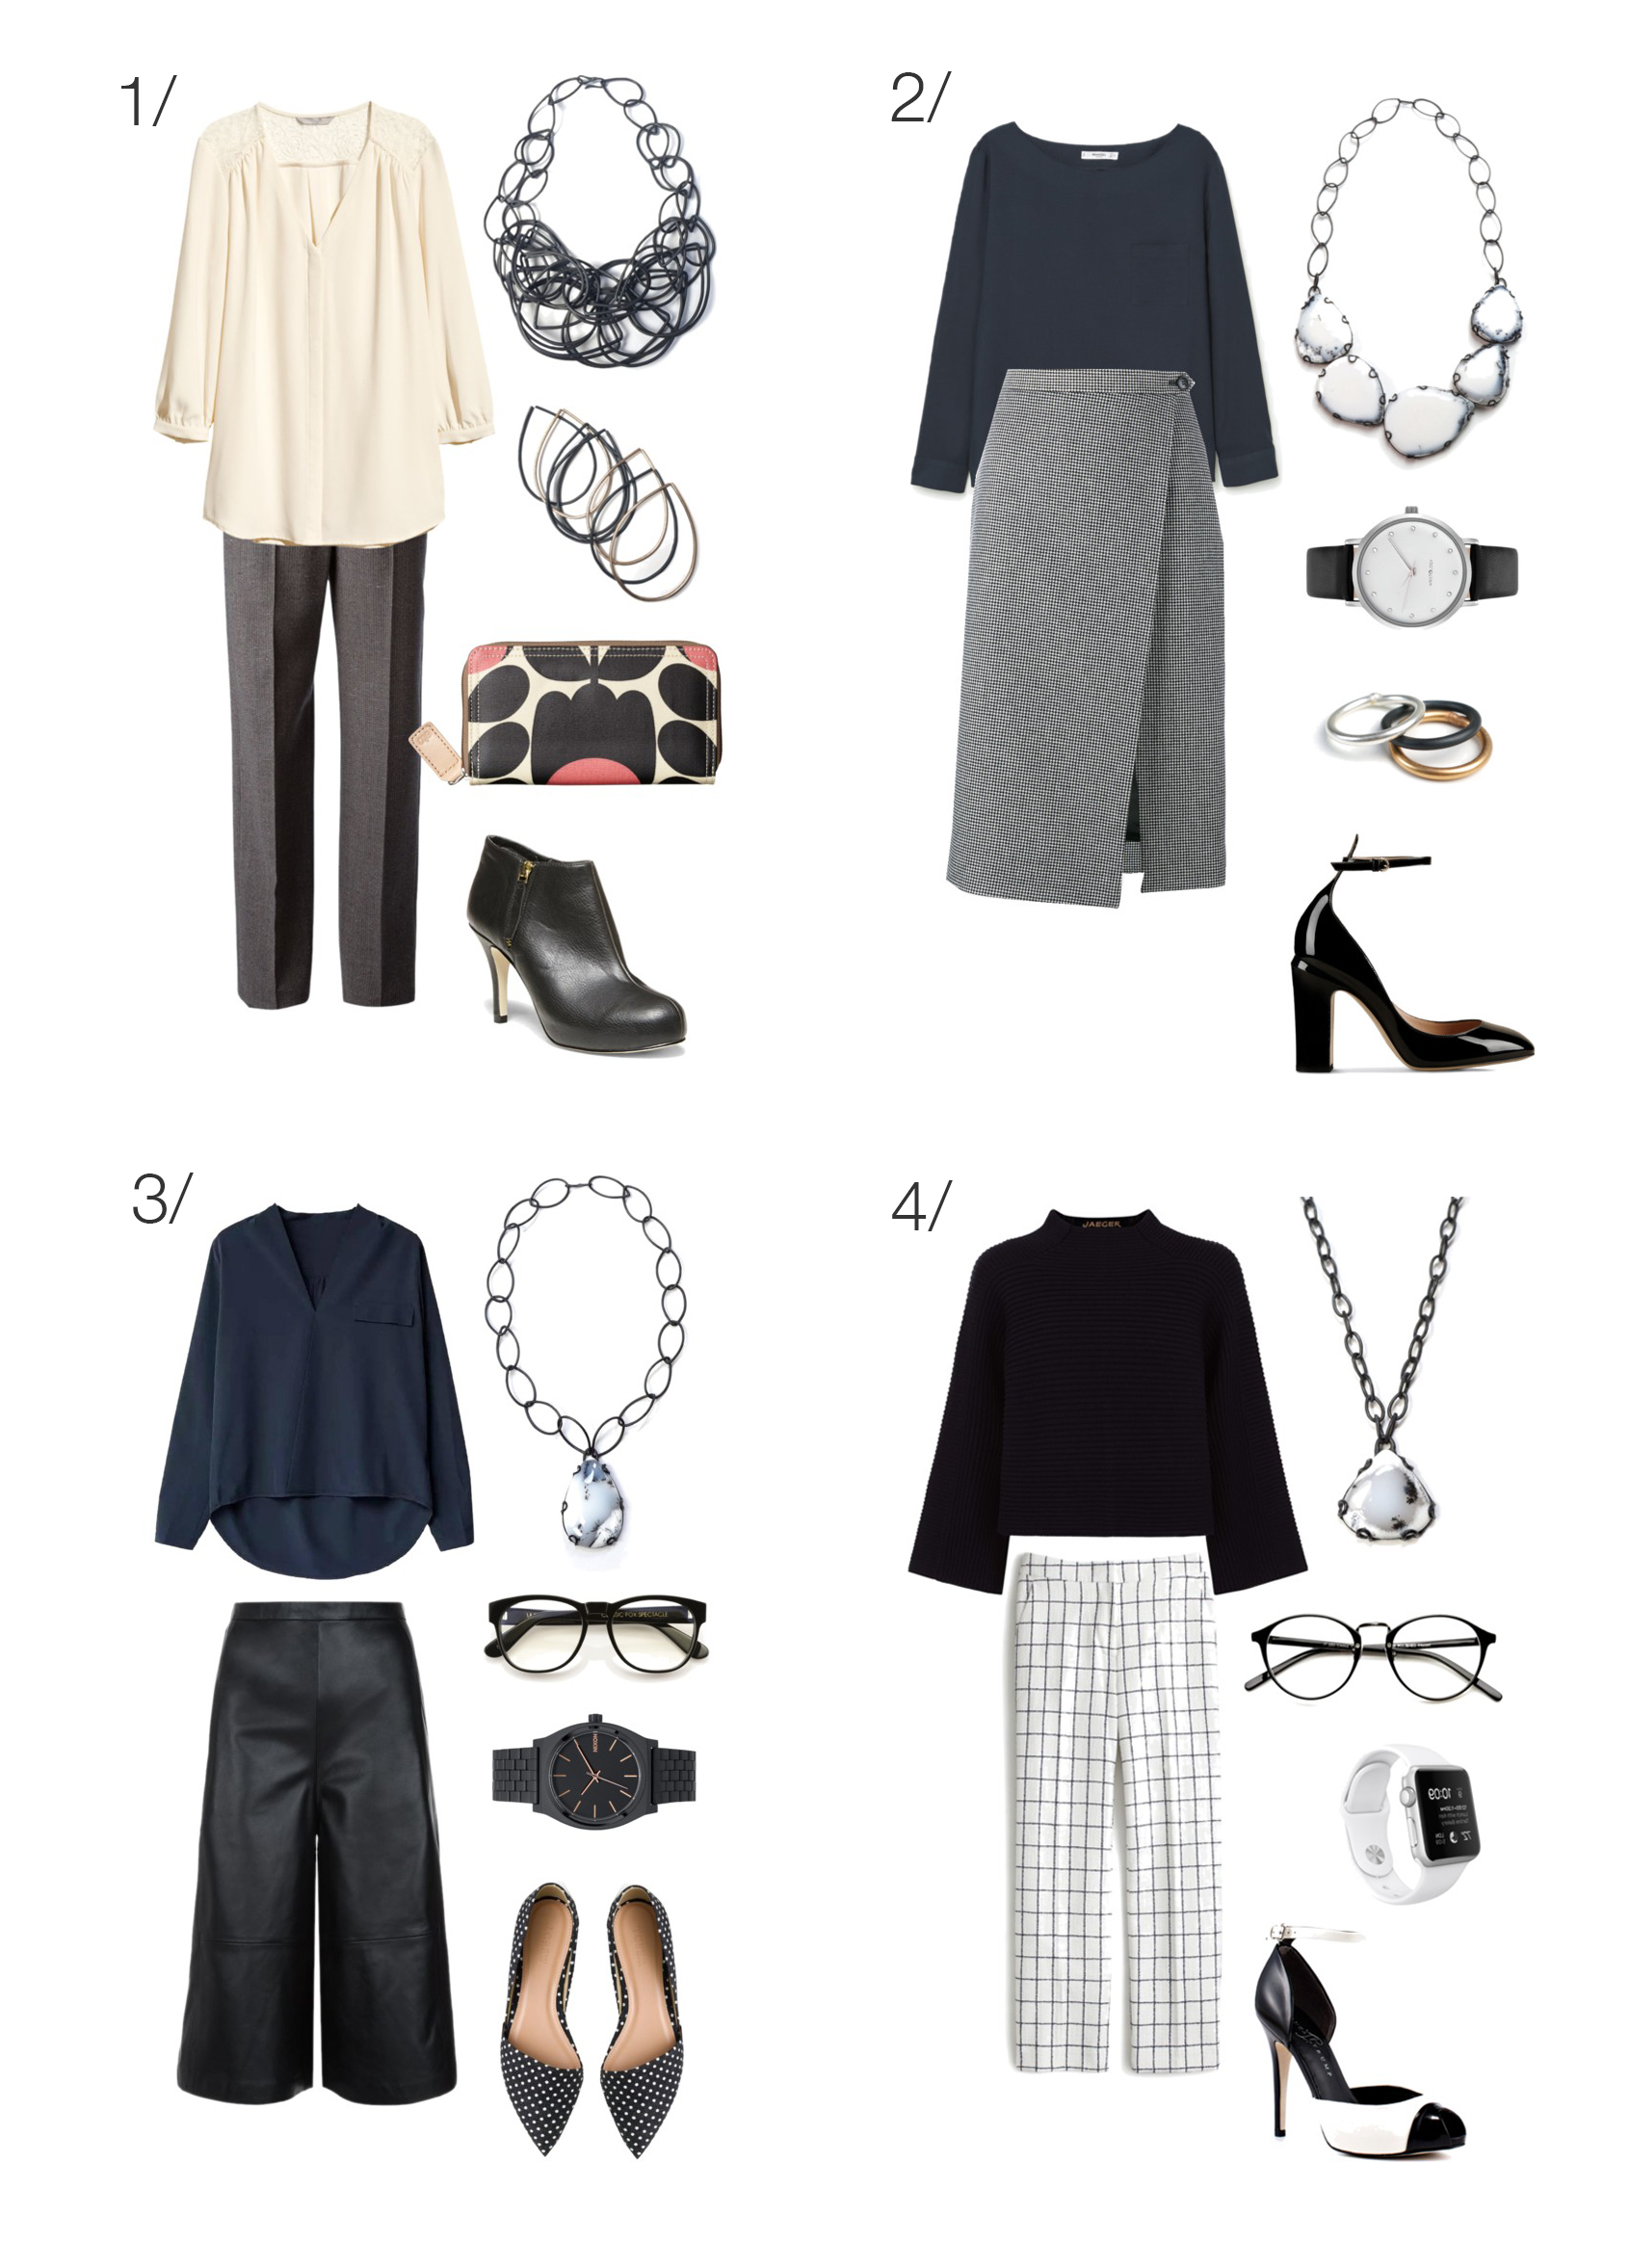 professional style: 8 simple and chic outfits to wear to work // click through for outfit details